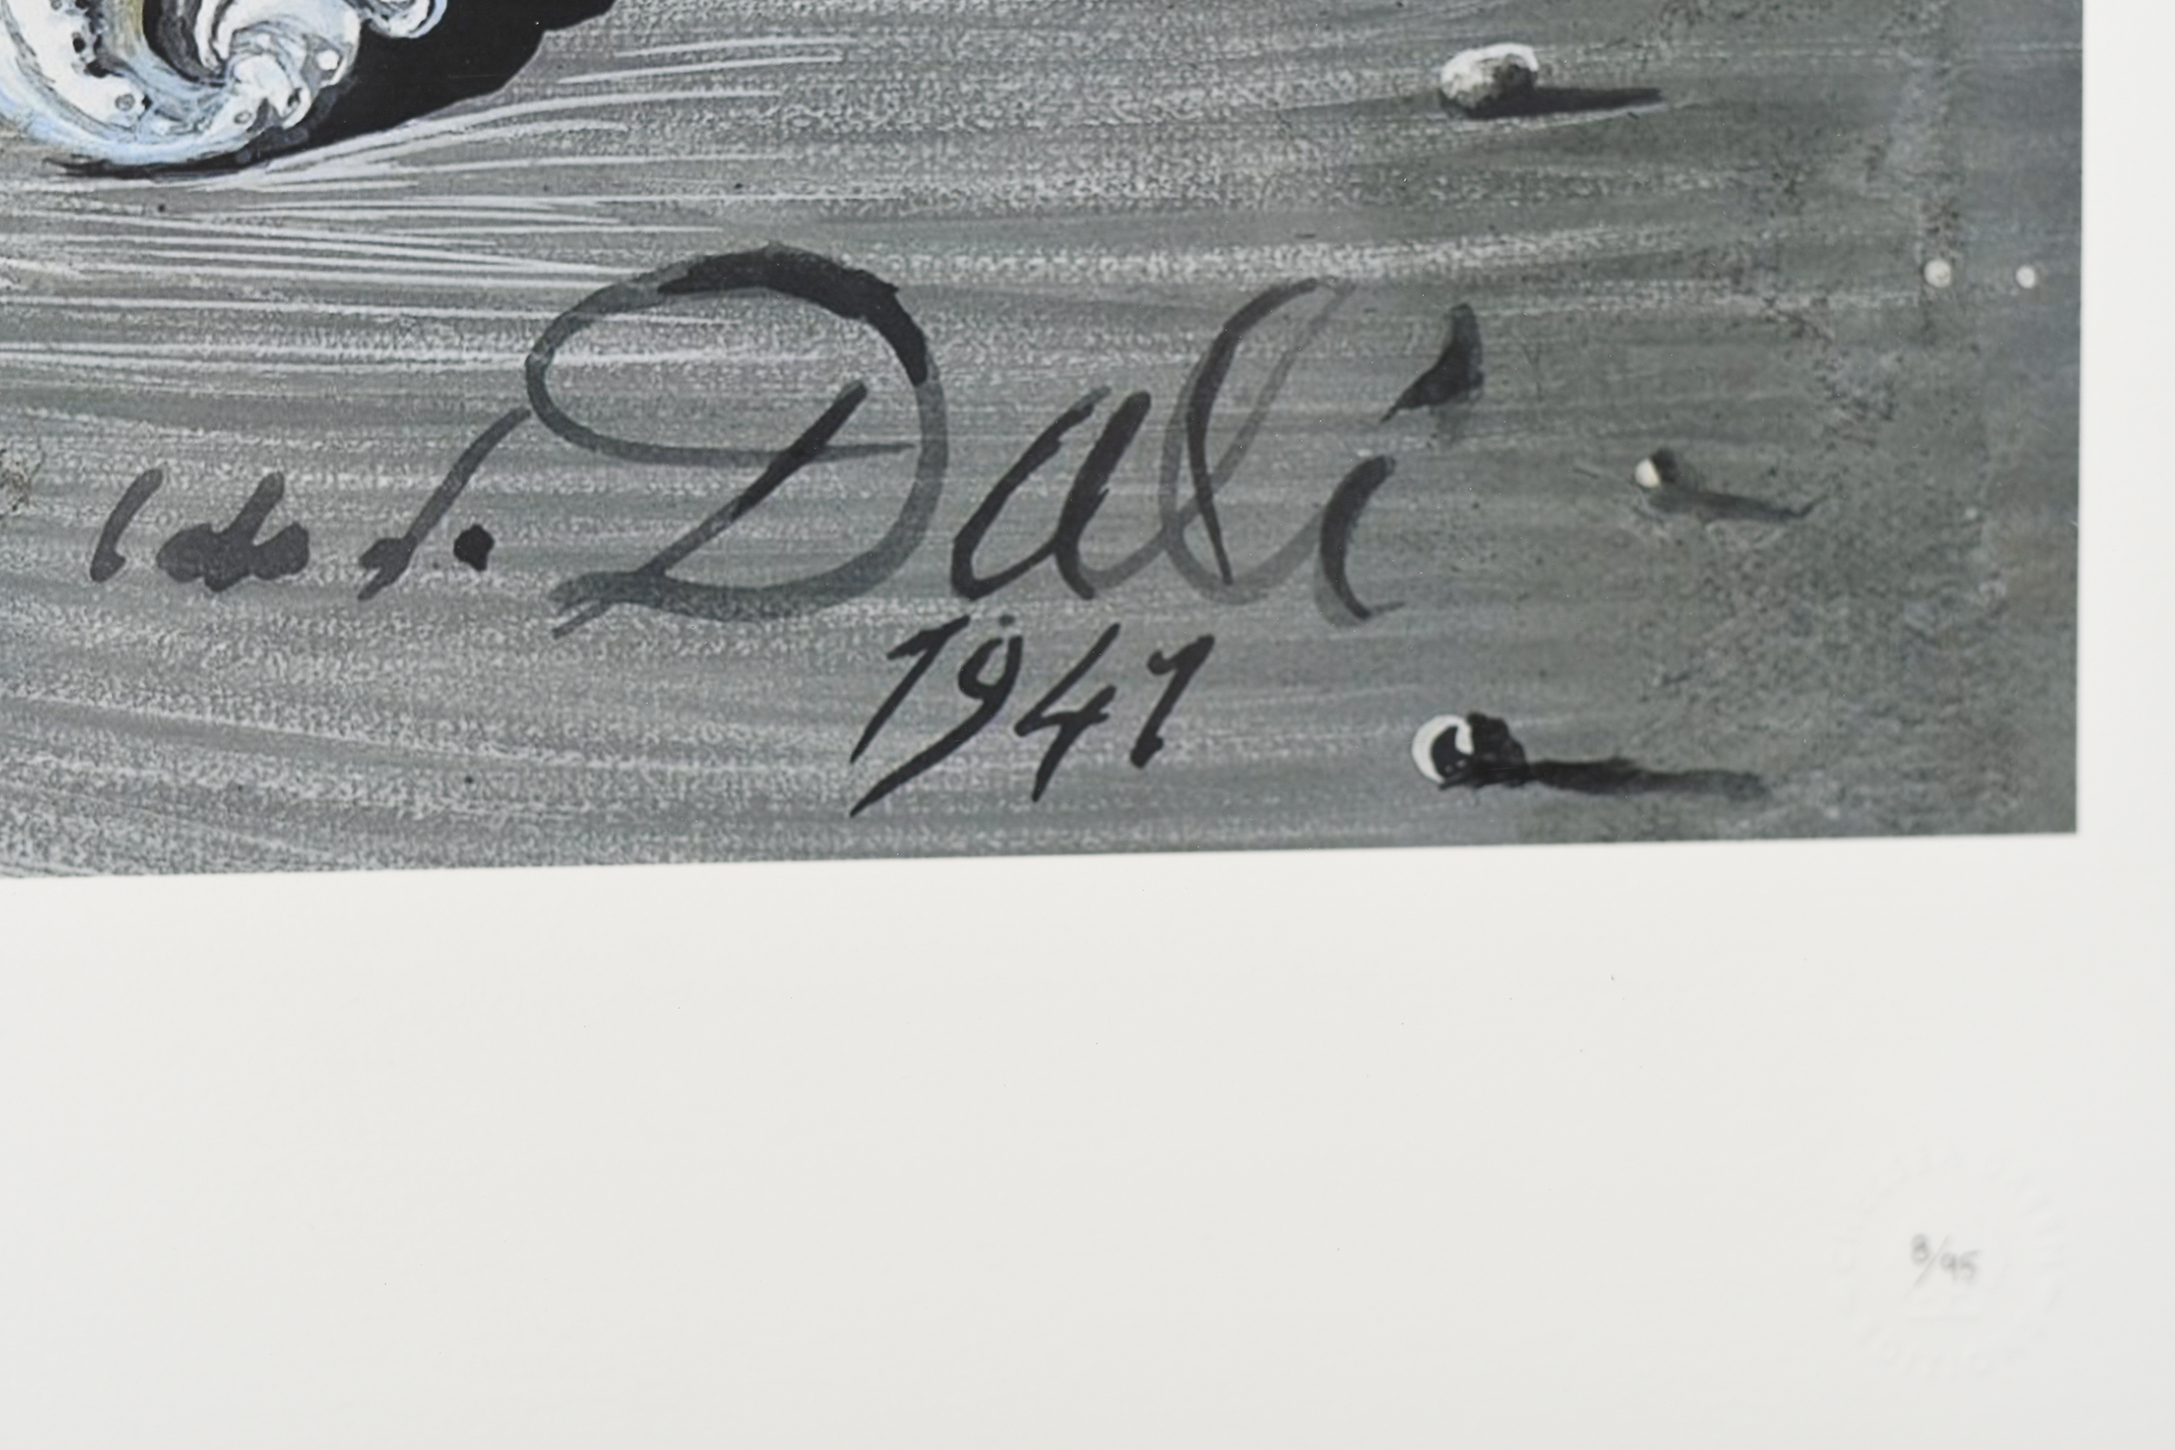 Salvador Dali Limited Edition One of only 95 Published. - Image 5 of 9